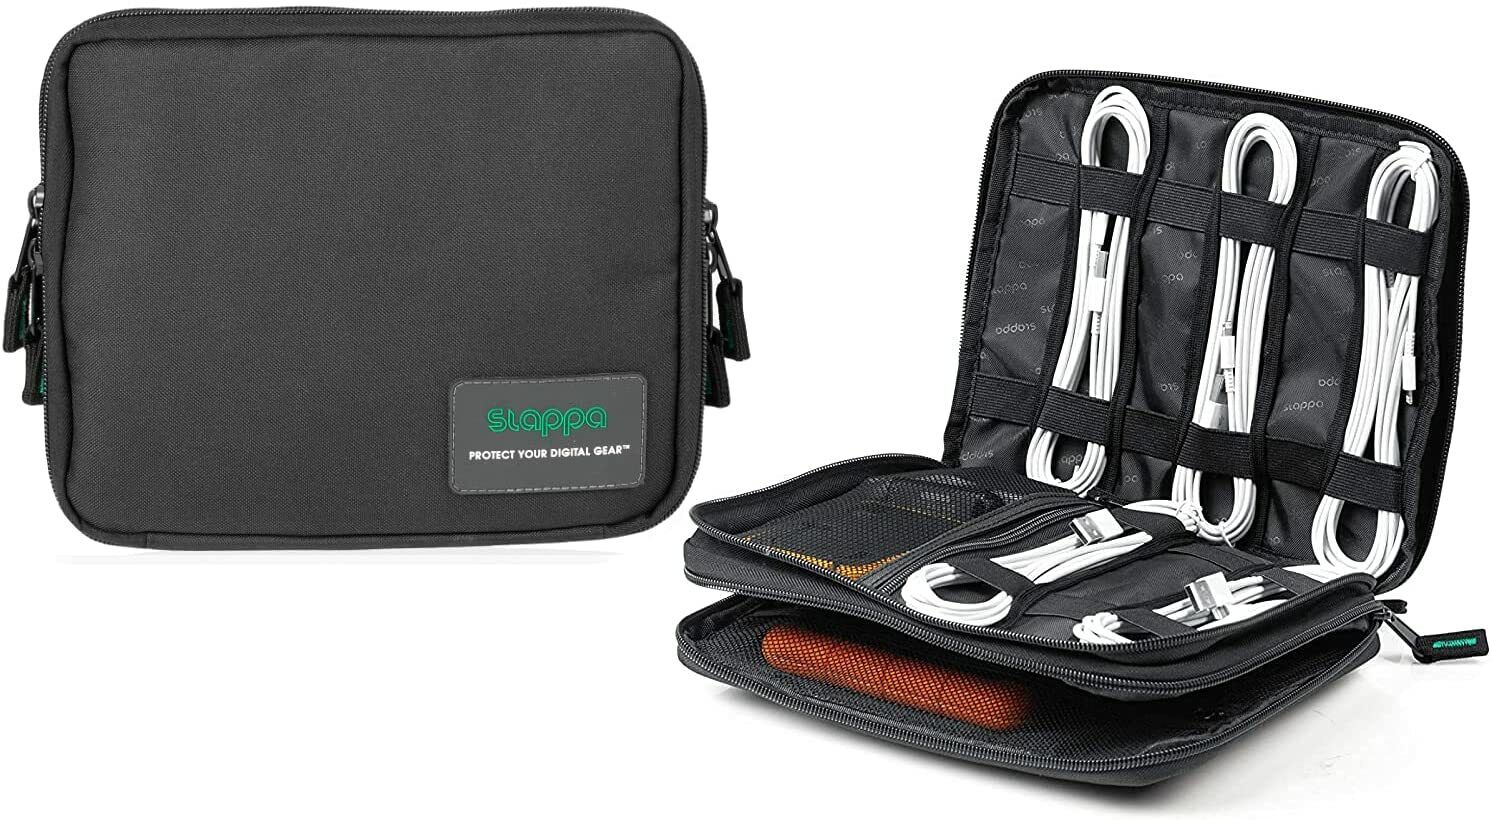 Slappa Travel Organizer for Electronic Devices, Charging Cables & Flash Storage